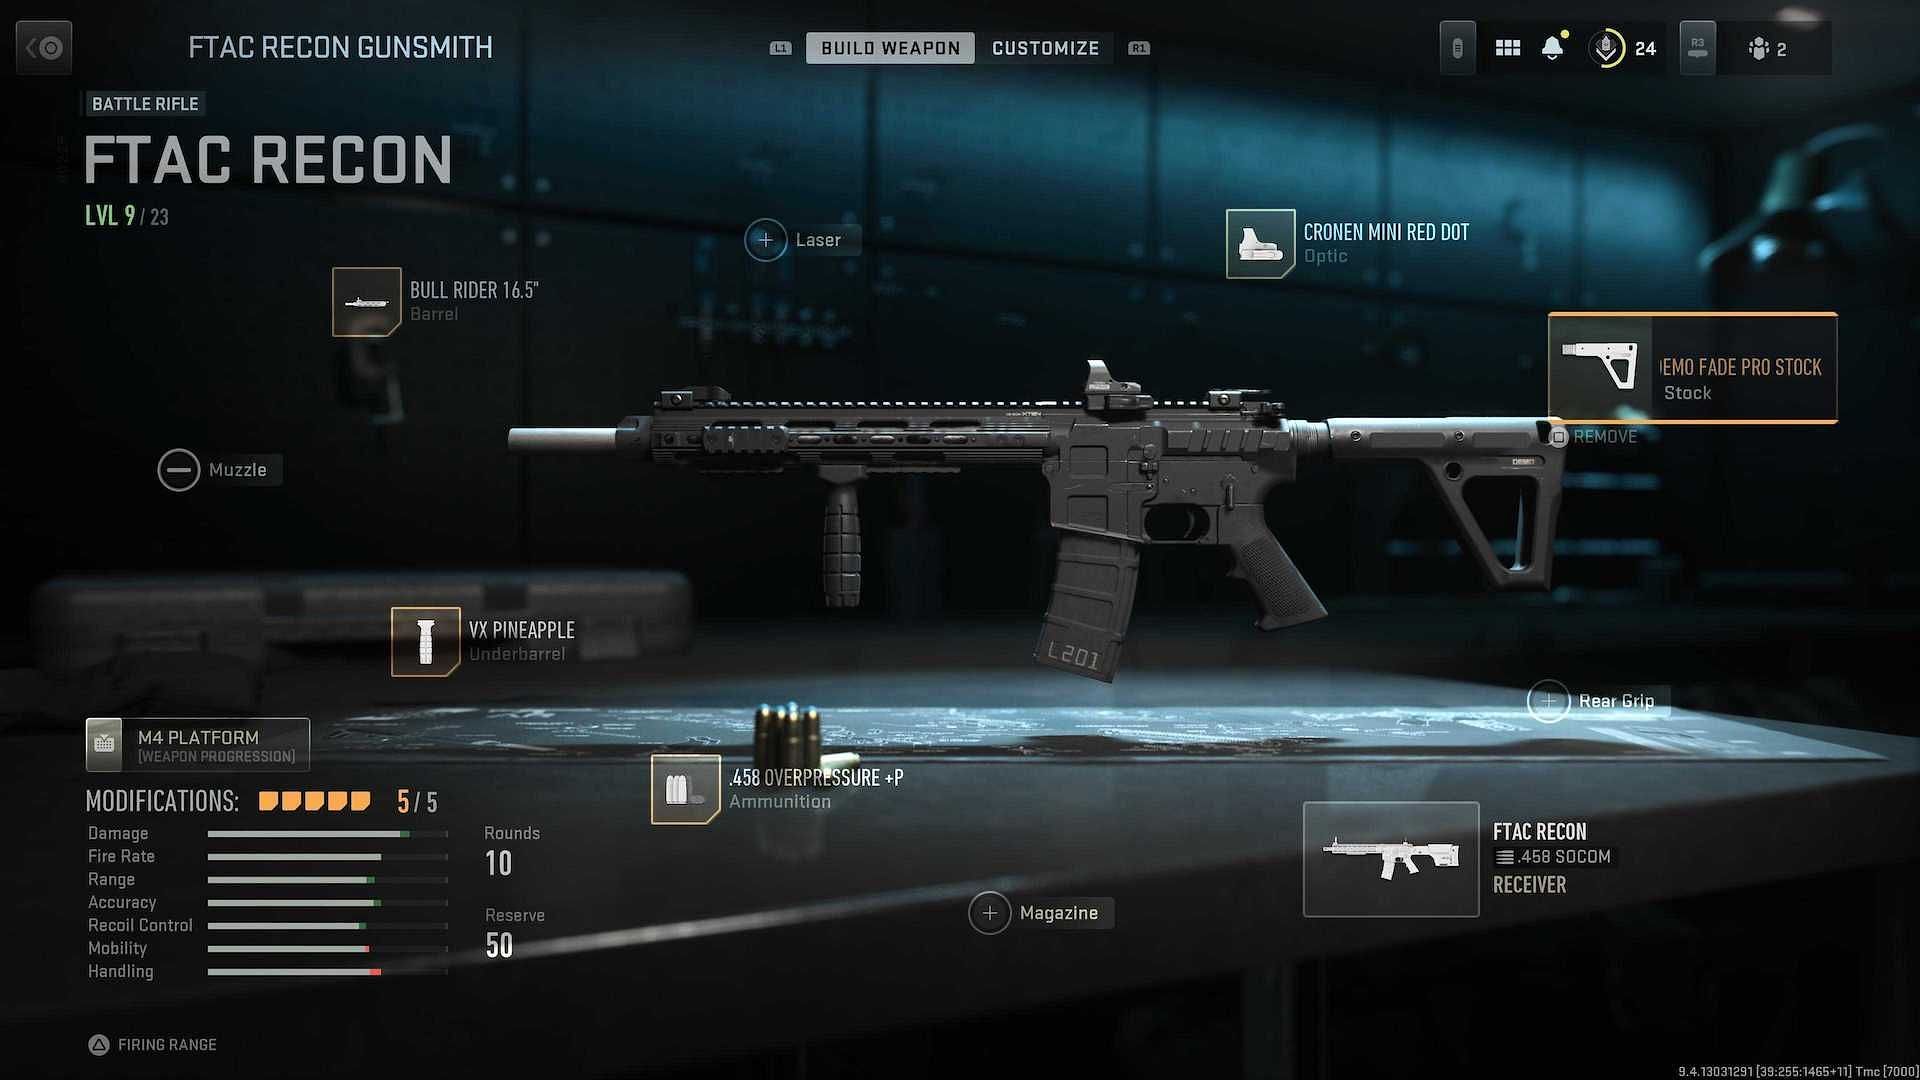 FTAC Recon loadout in MW2 (Image via Activision)